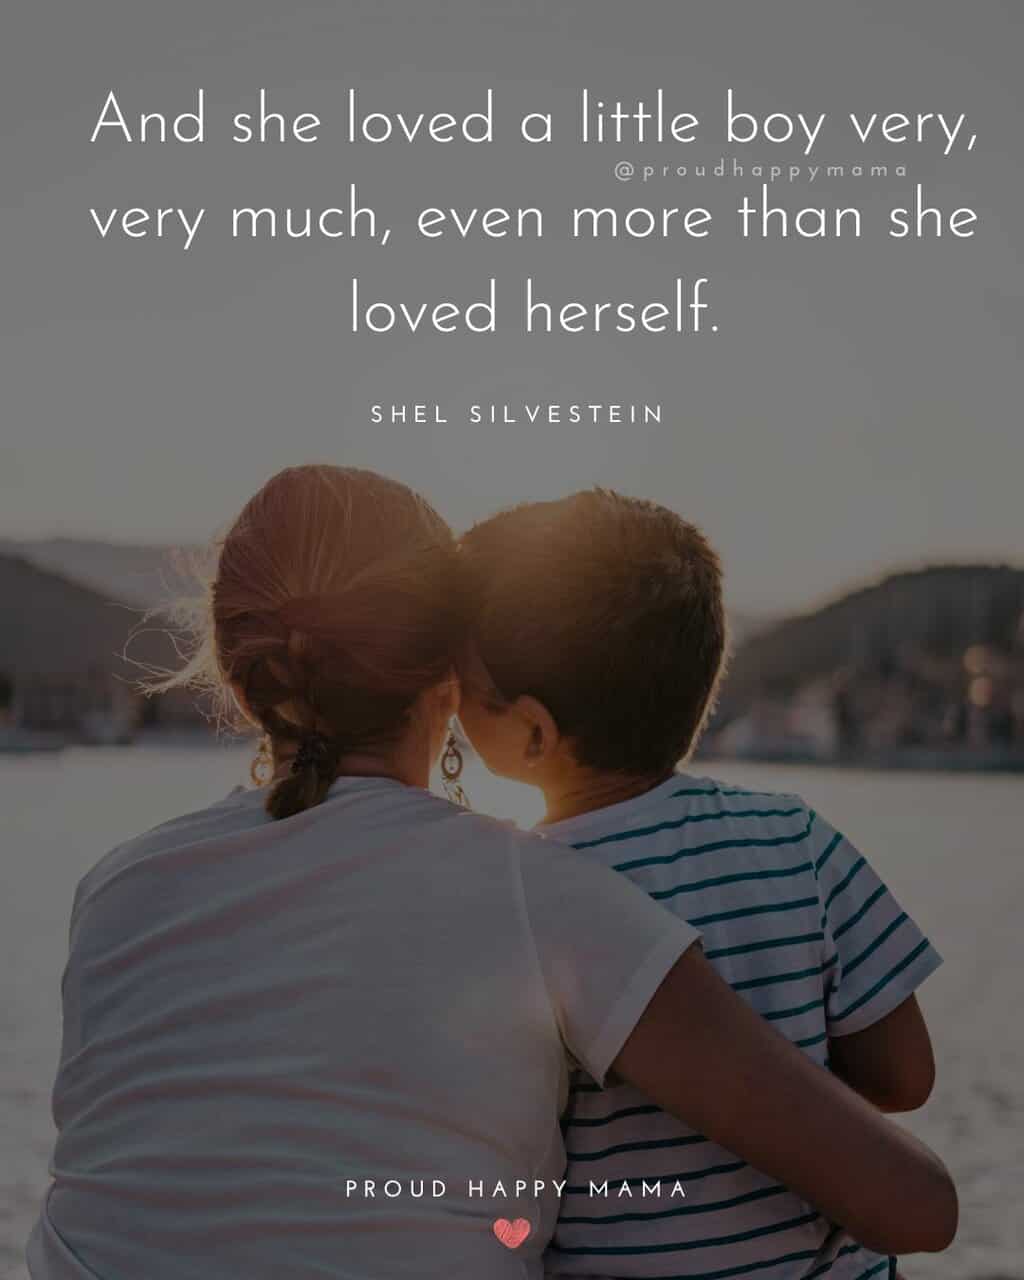 Little boy quotes - ‘And she loved a little boy very, very much. Even more than she loved herself.’ - Shel Silverstein